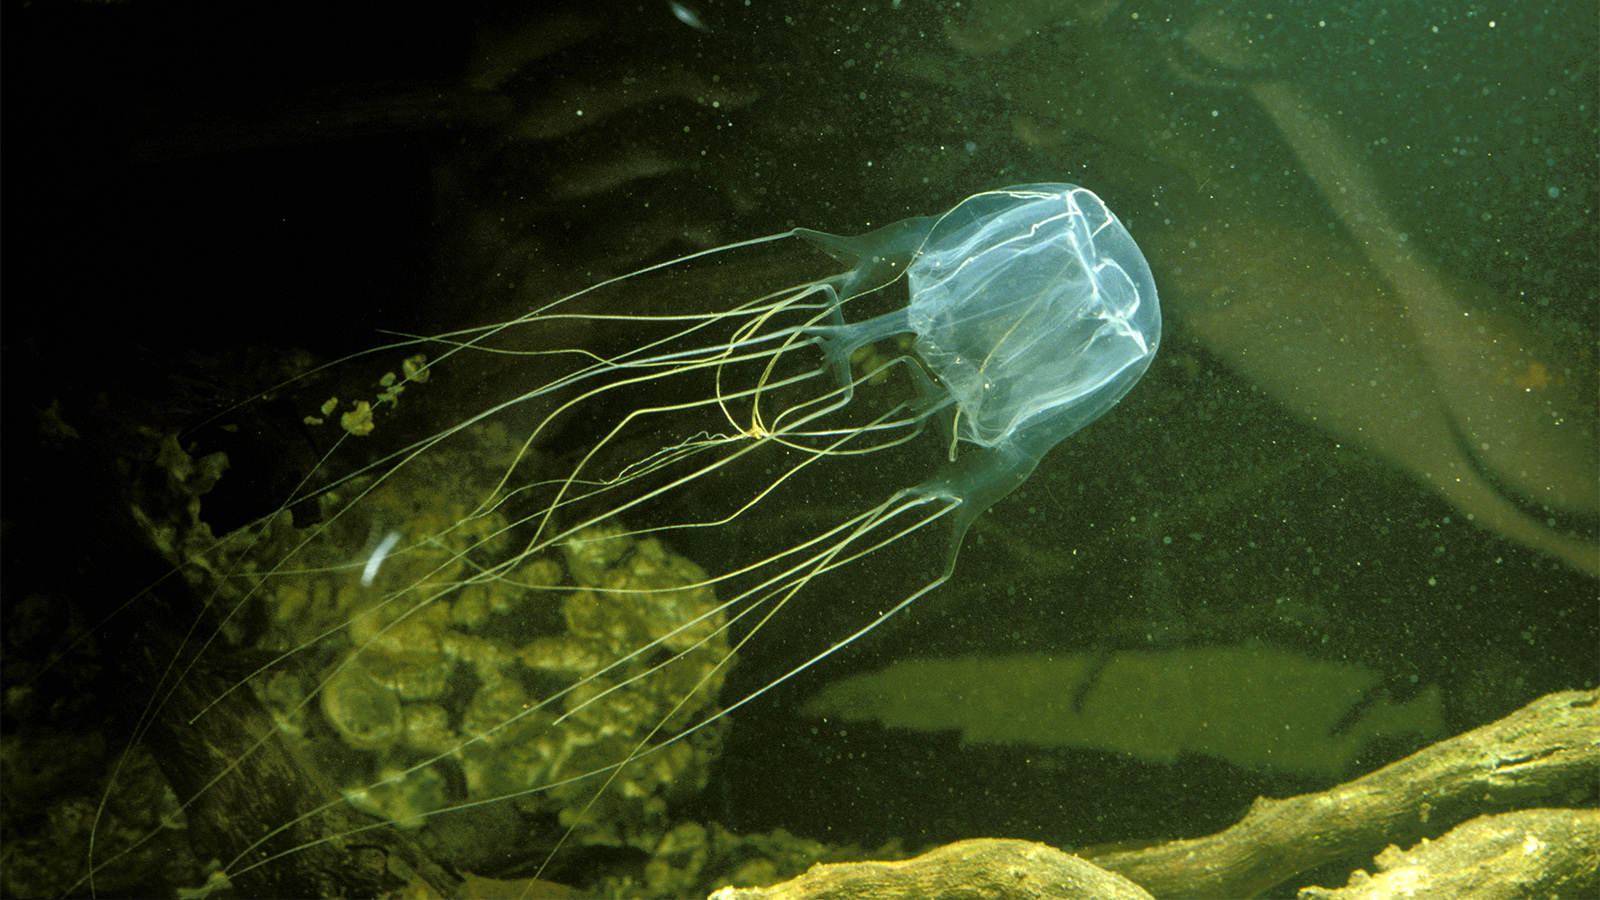 Box jellyfish has a numerous threadlike structure that loaded with poison